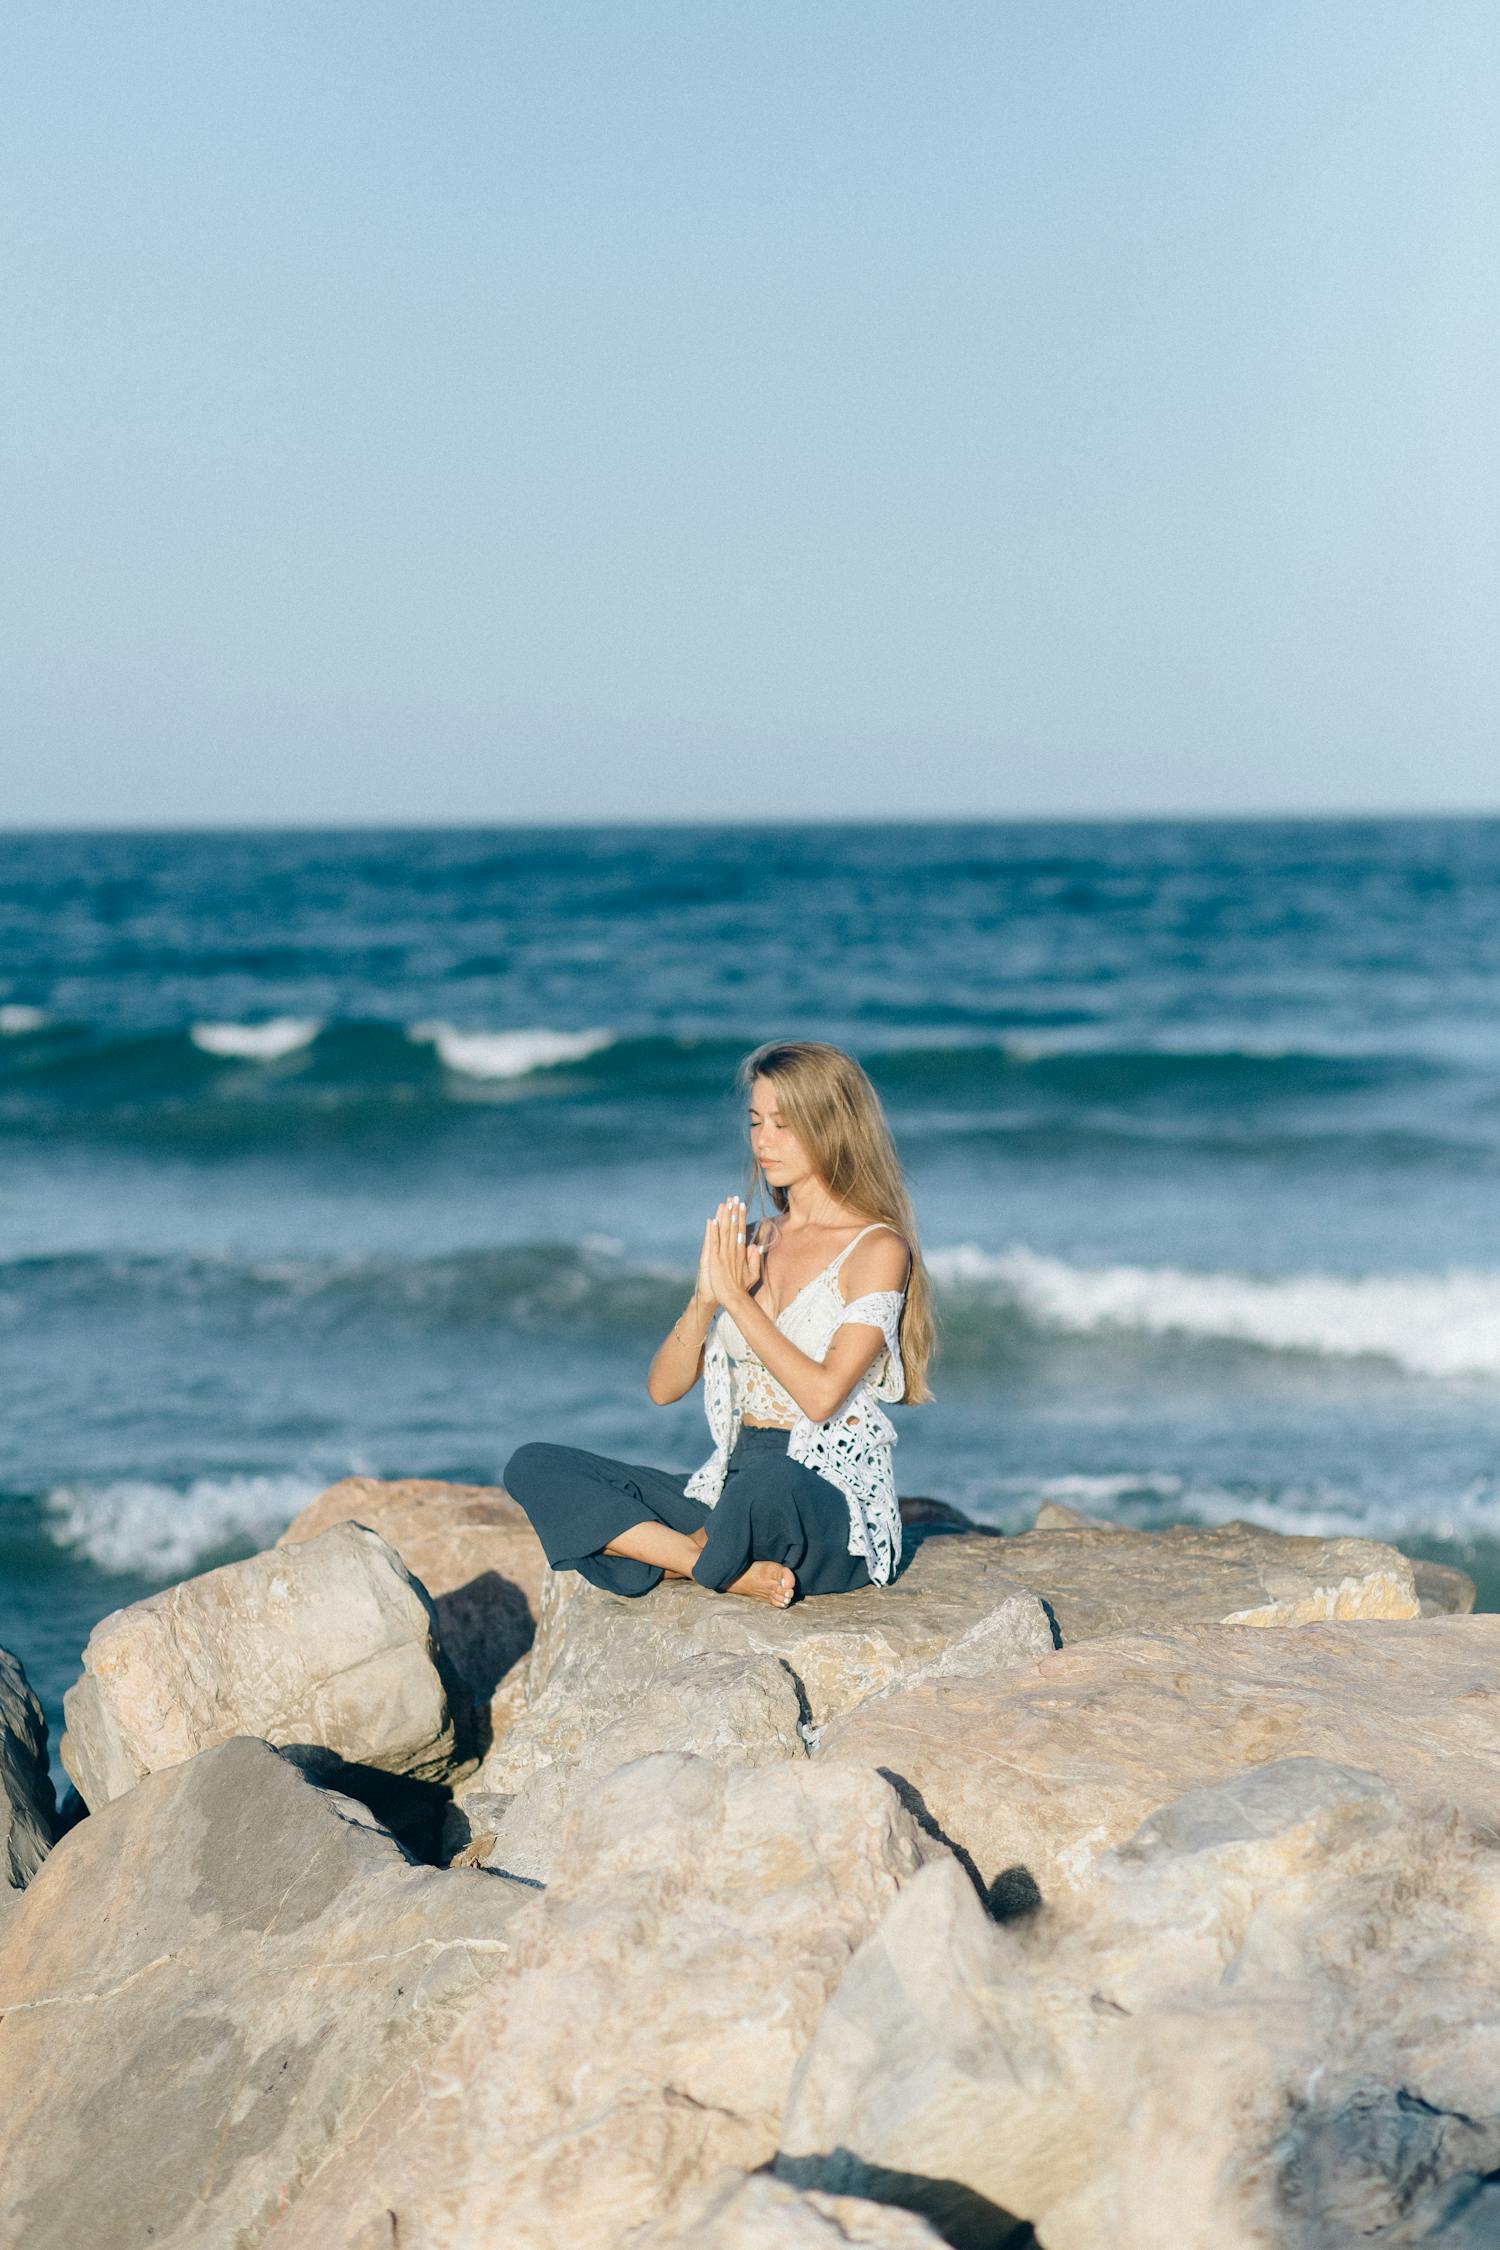 Woman in White and Black Dress Sitting on Rock Near Sea · Free Stock Photo